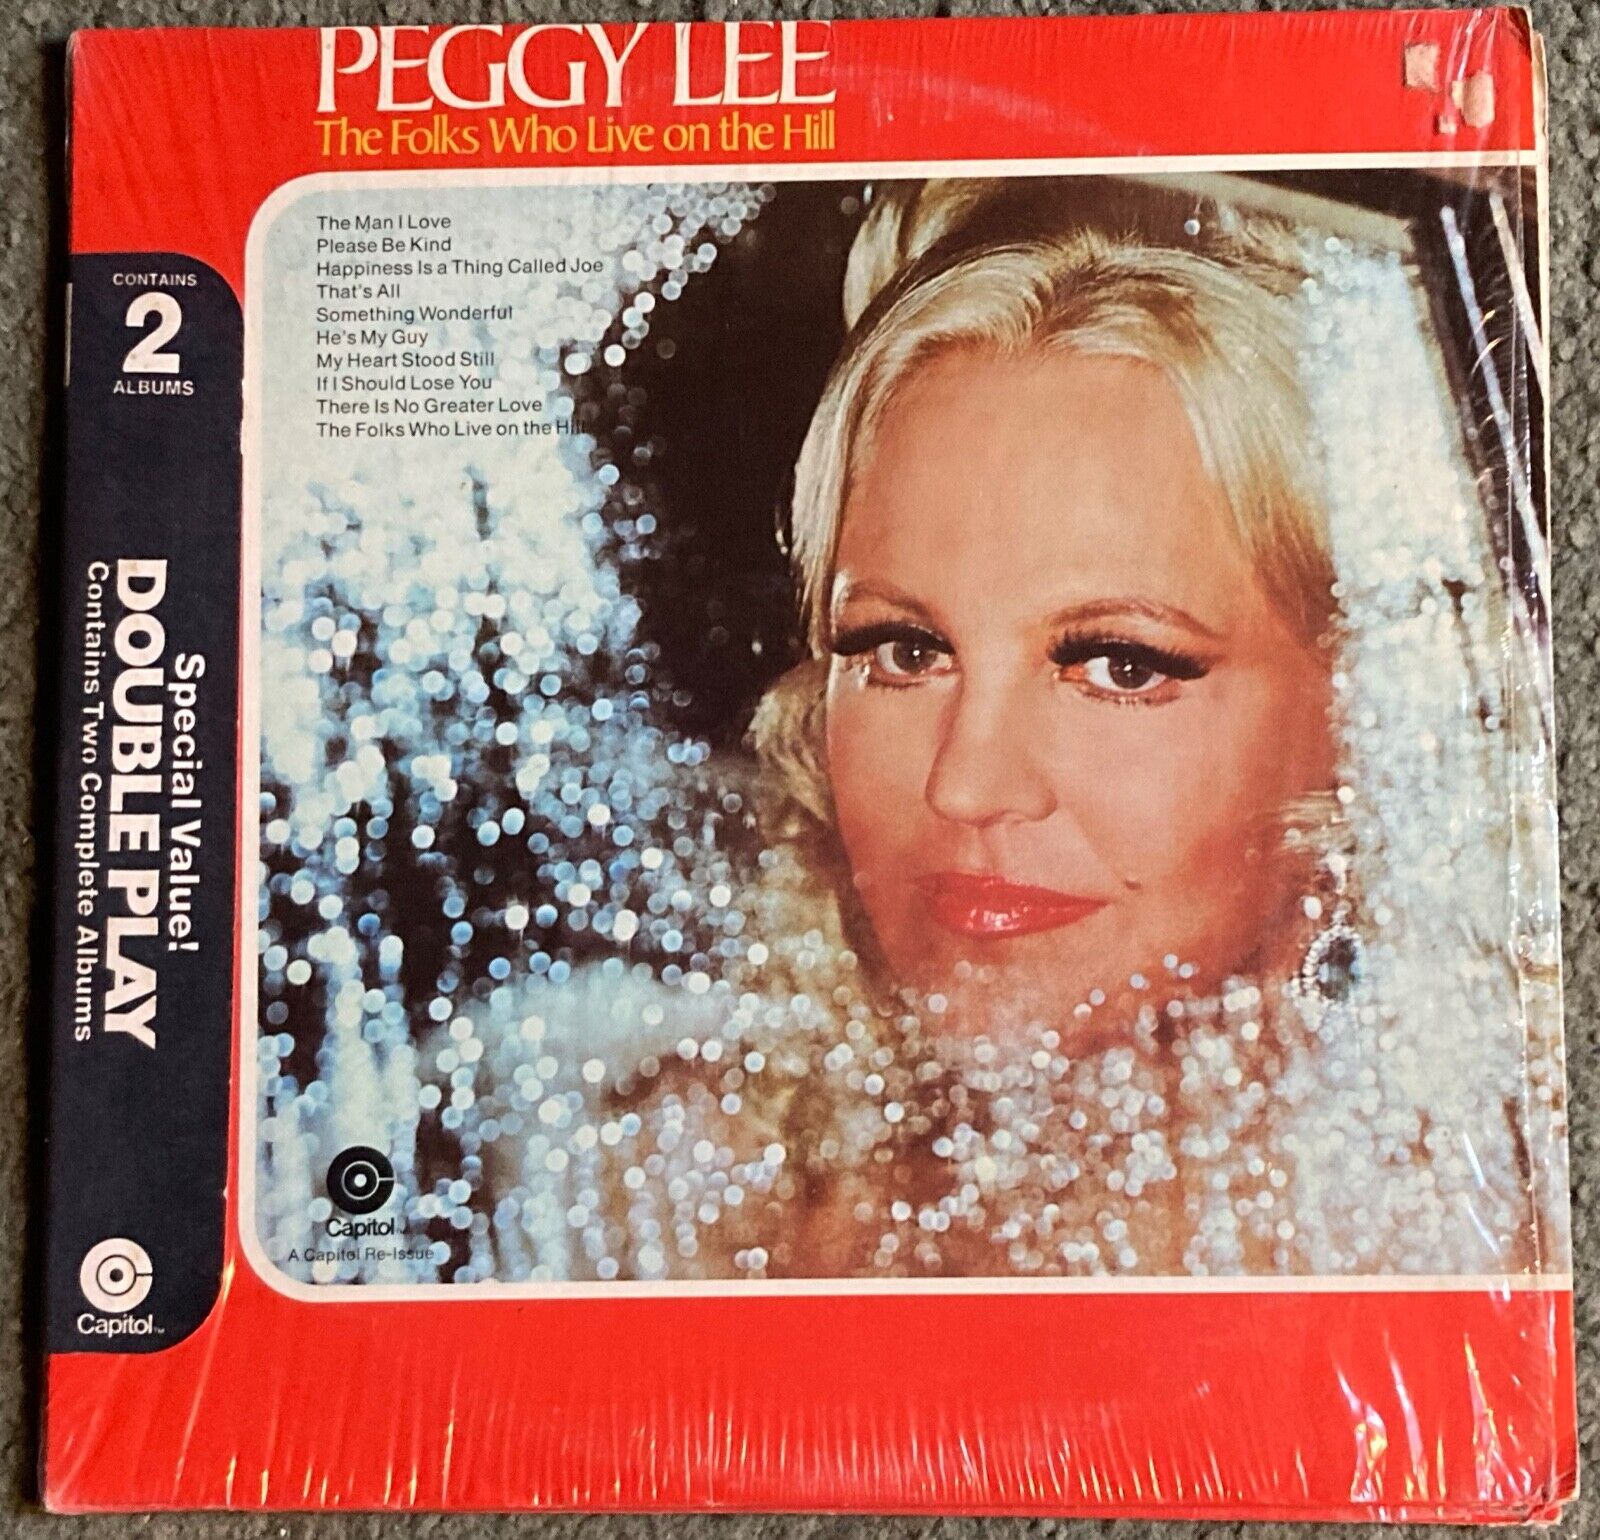 2 PEGGY LEE LP : The Folks Who Live on the Hill  &  Broadway a la Lee